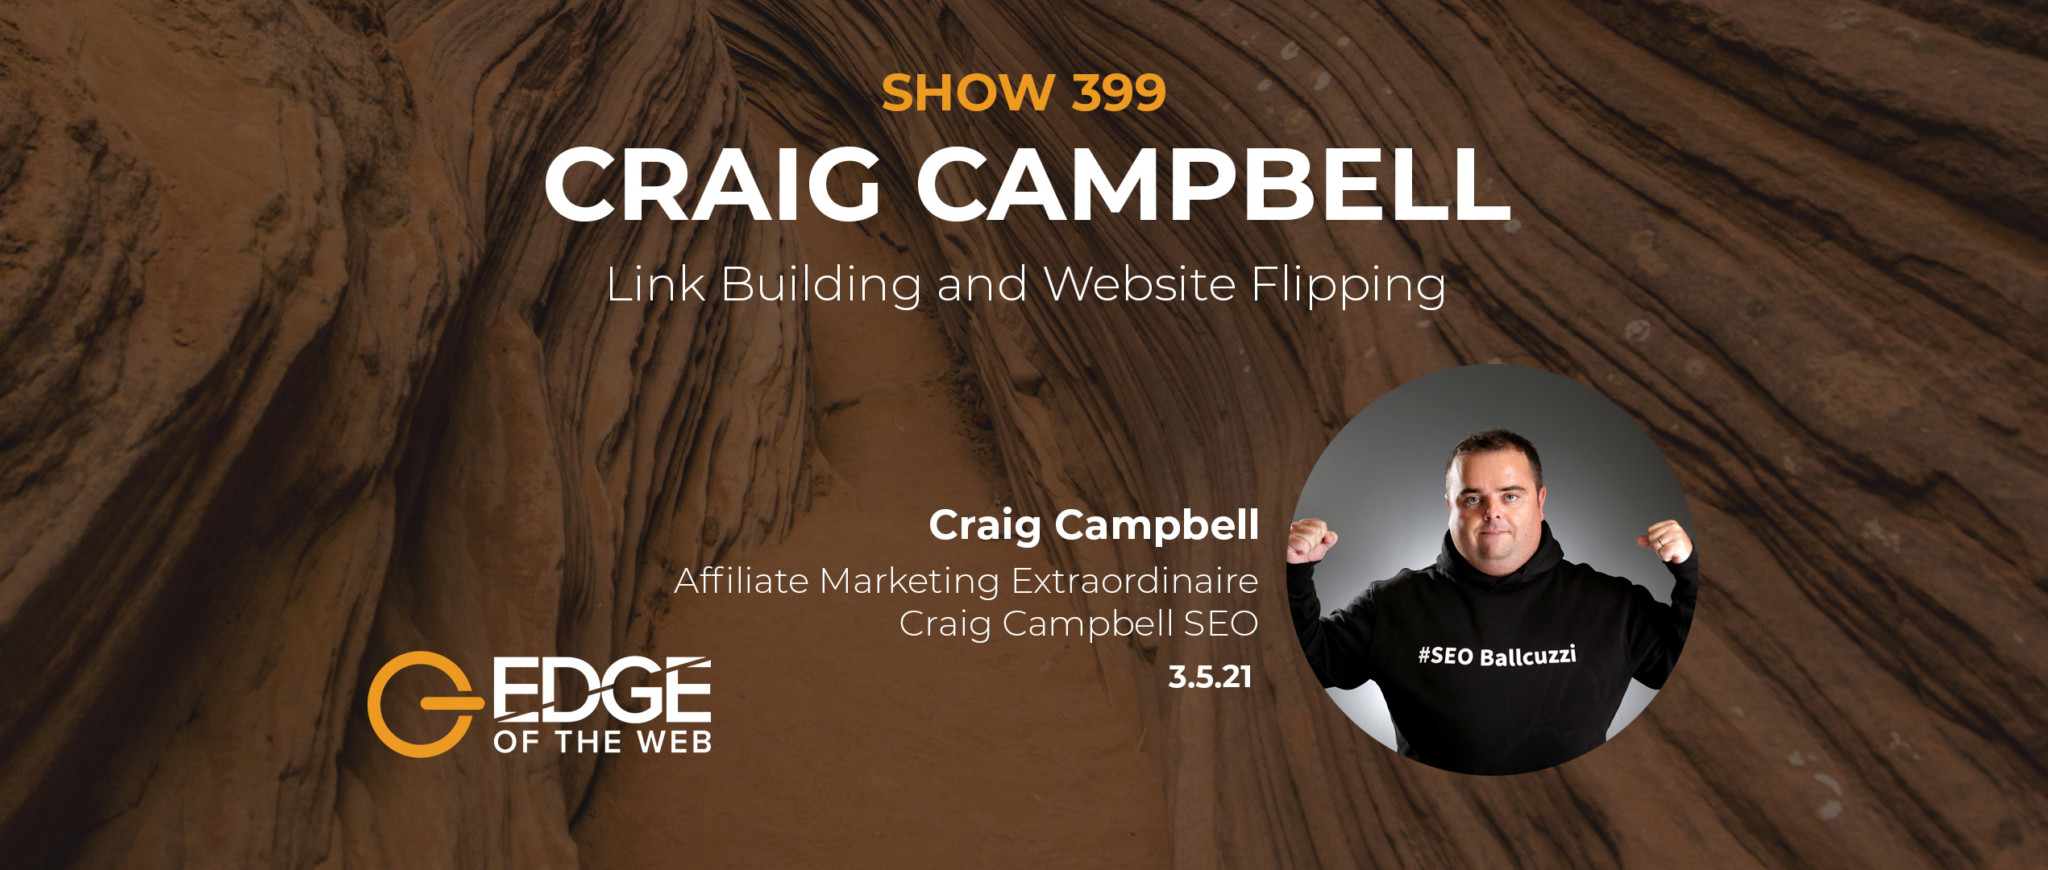 EP399 Craig Campbell EDGE Featured Image